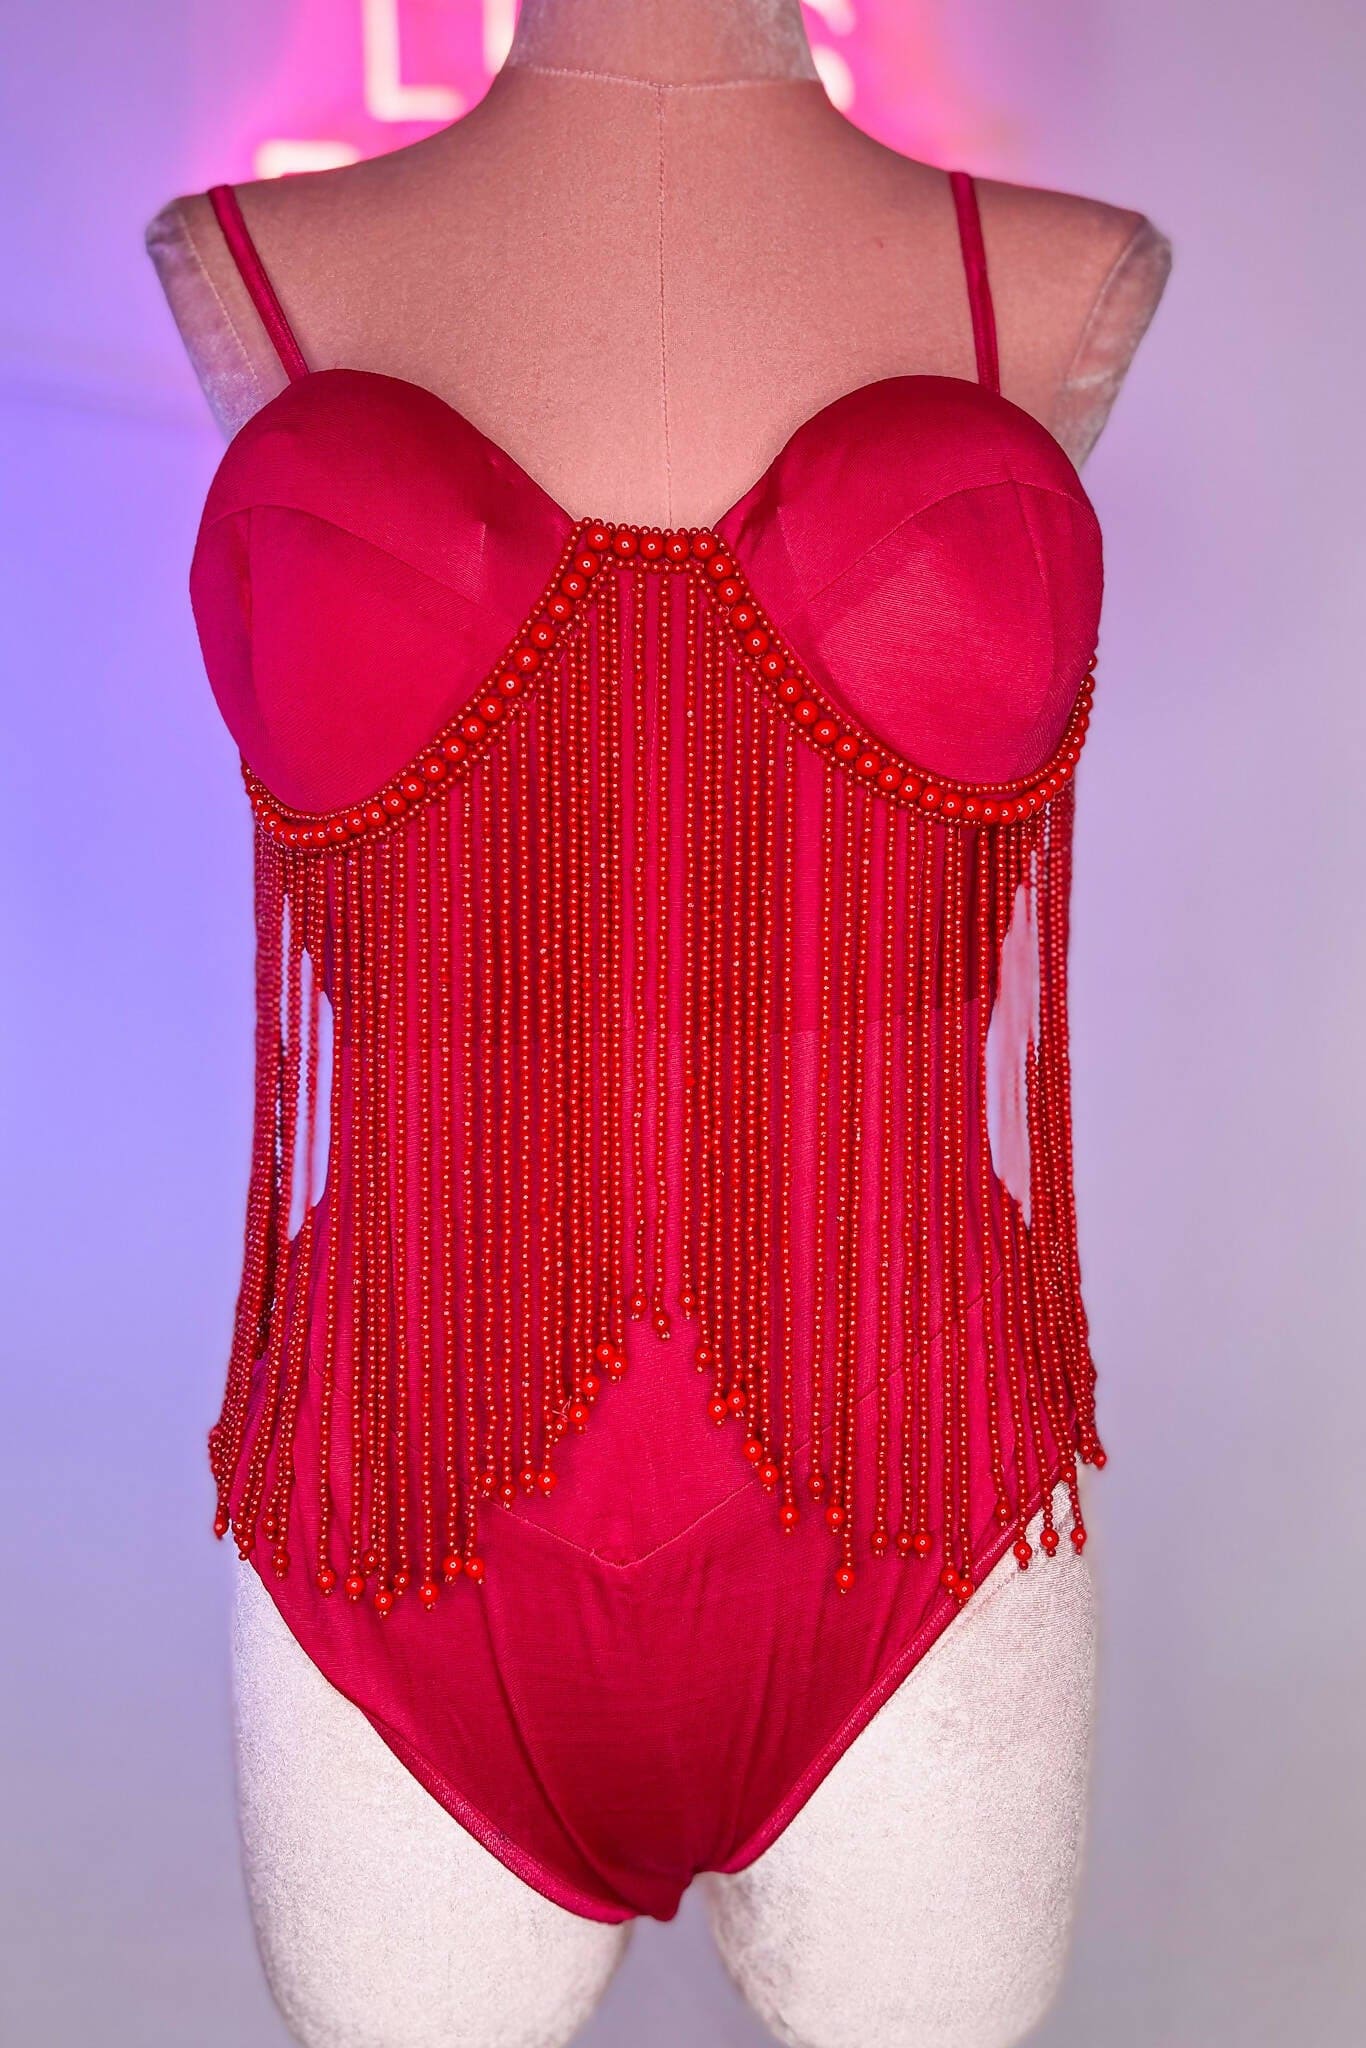 Red Corset Tasselled bodysuit  Rave and Festival clothing on Wild